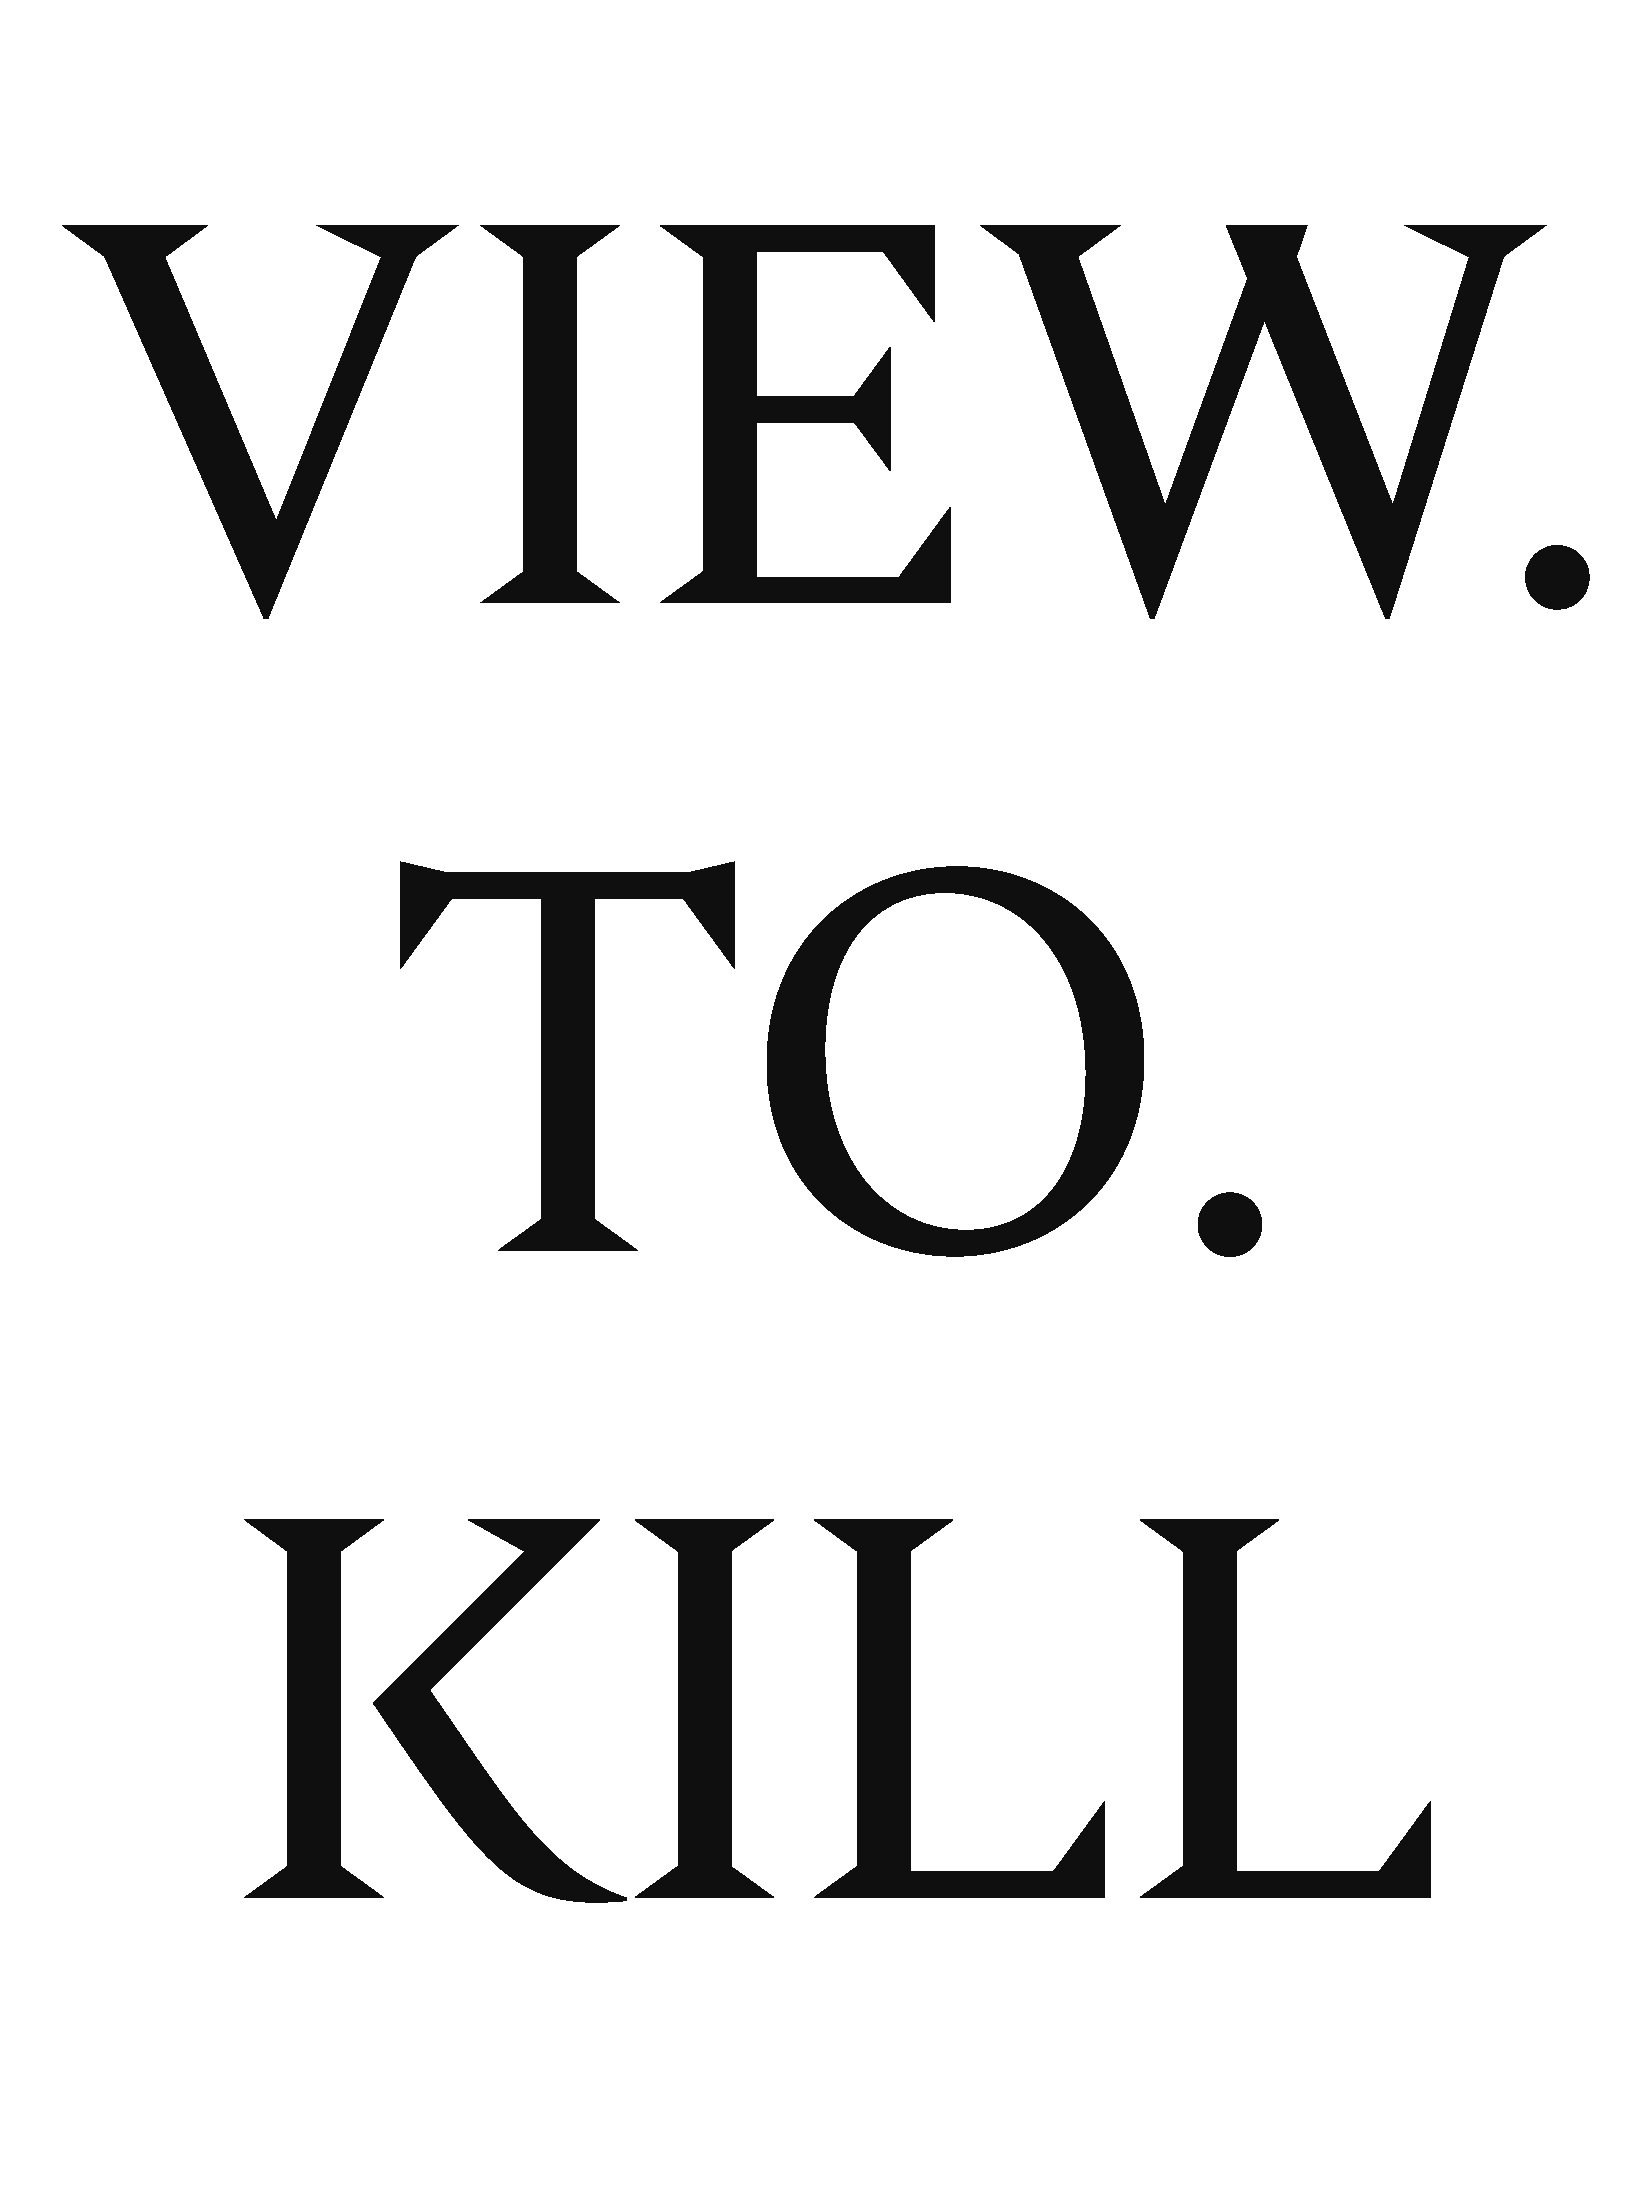 View.To.Kill